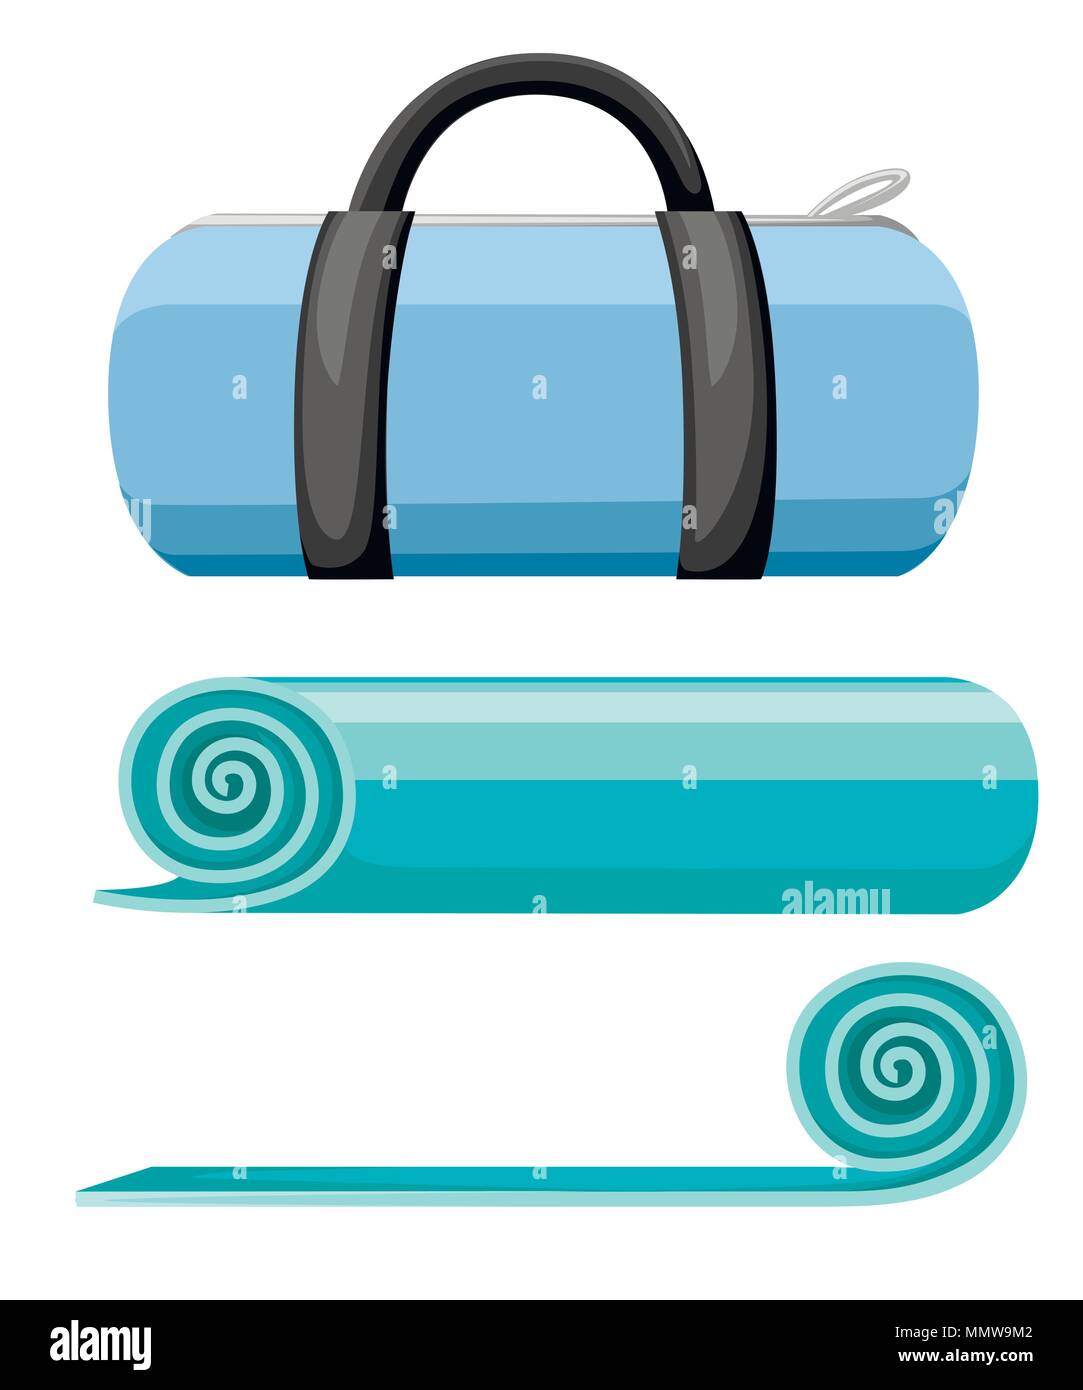 https://c8.alamy.com/comp/MMW9M2/exercise-mat-and-sports-bag-rolled-and-open-turquoise-yoga-mat-vector-illustration-isolated-on-white-background-MMW9M2.jpg